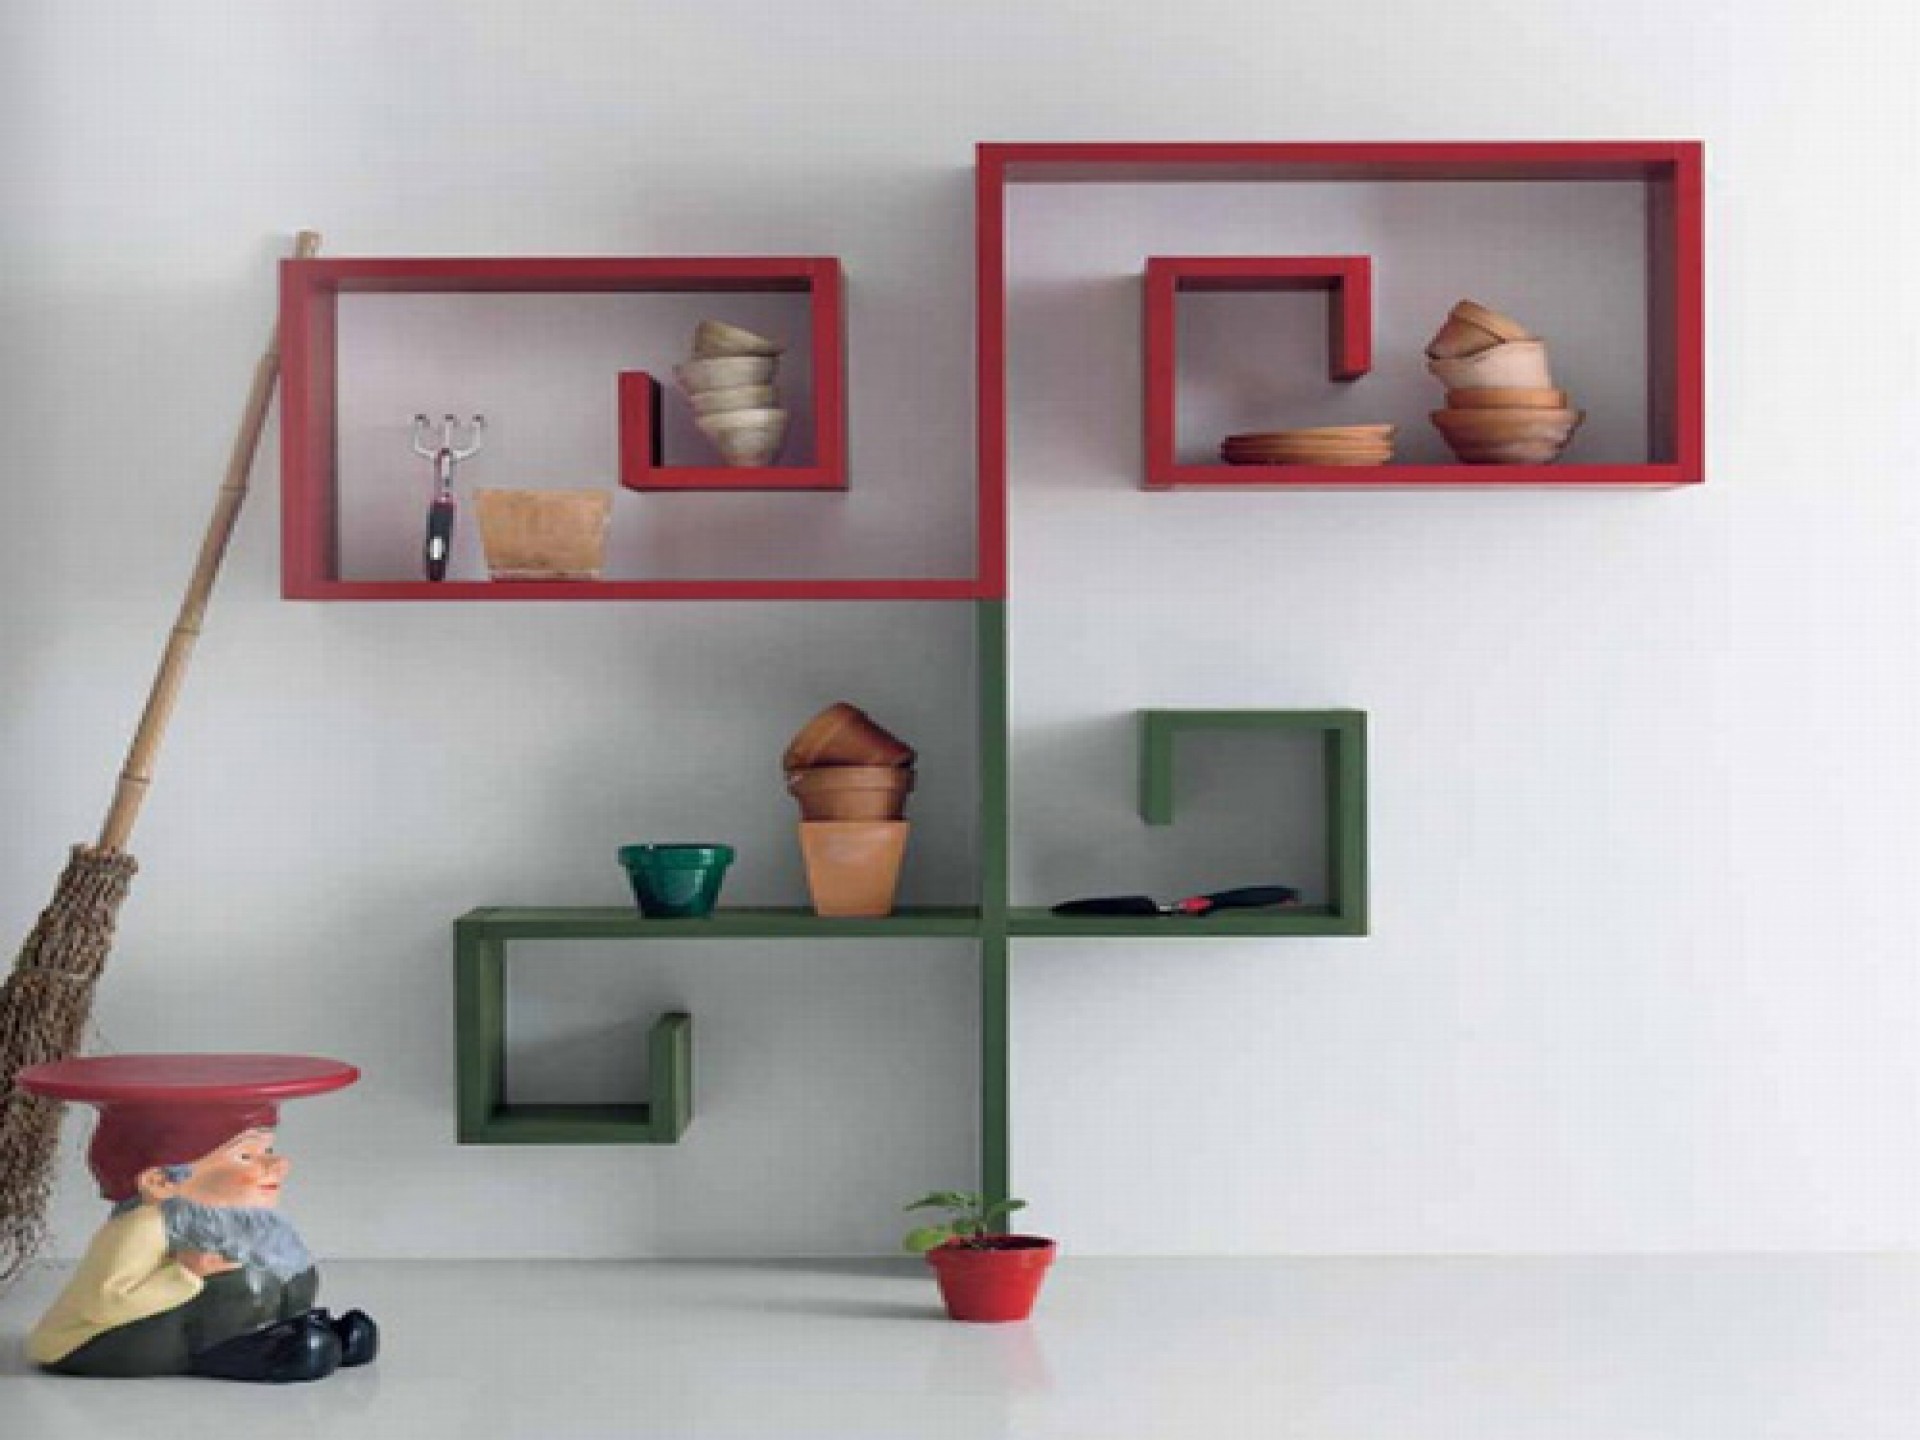 Bedroom Bedroom Shelving Units With Hanging Green And Red